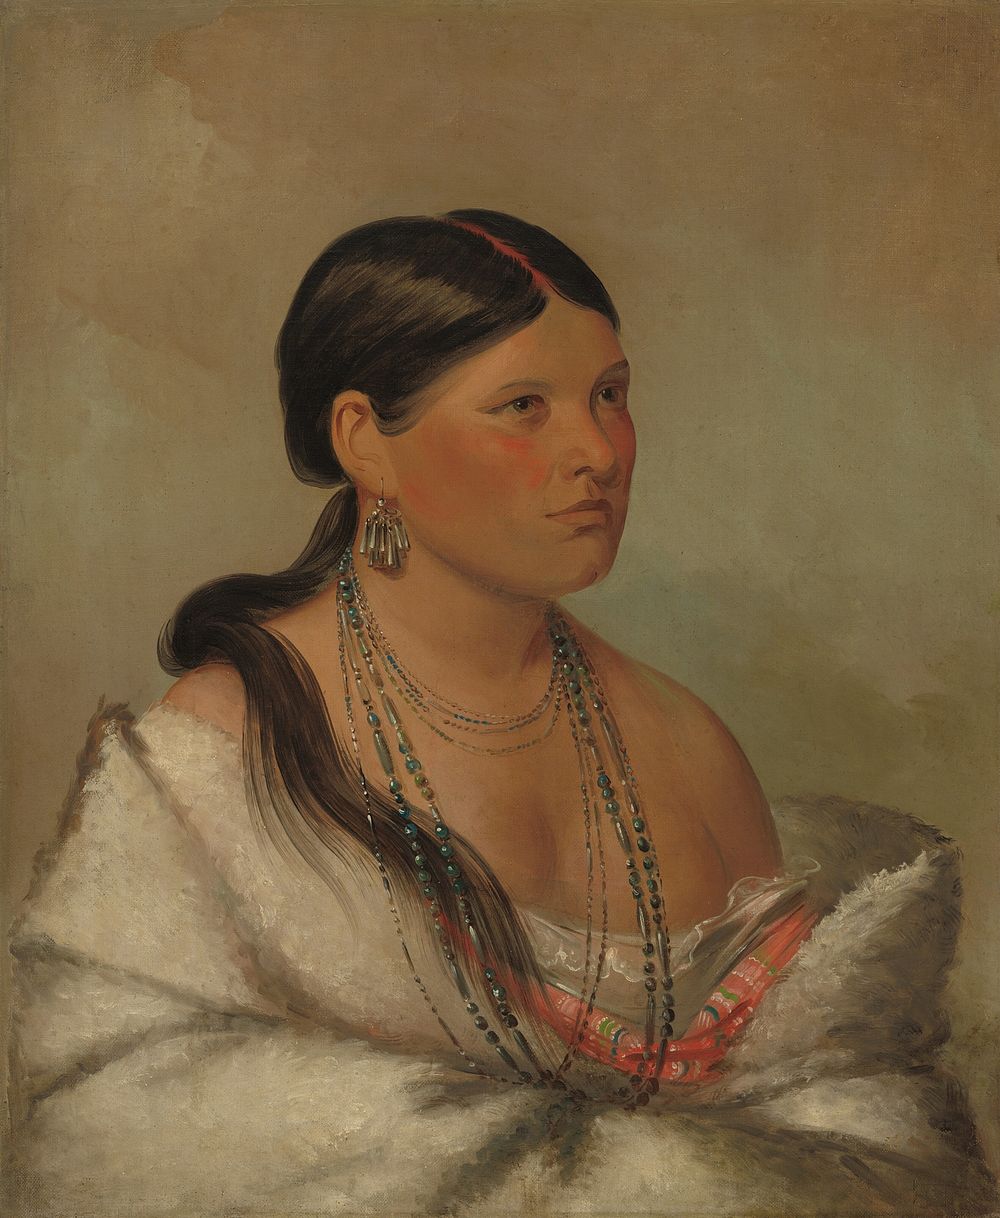 The Female Eagle - Shawano (1830) by George Catlin.  